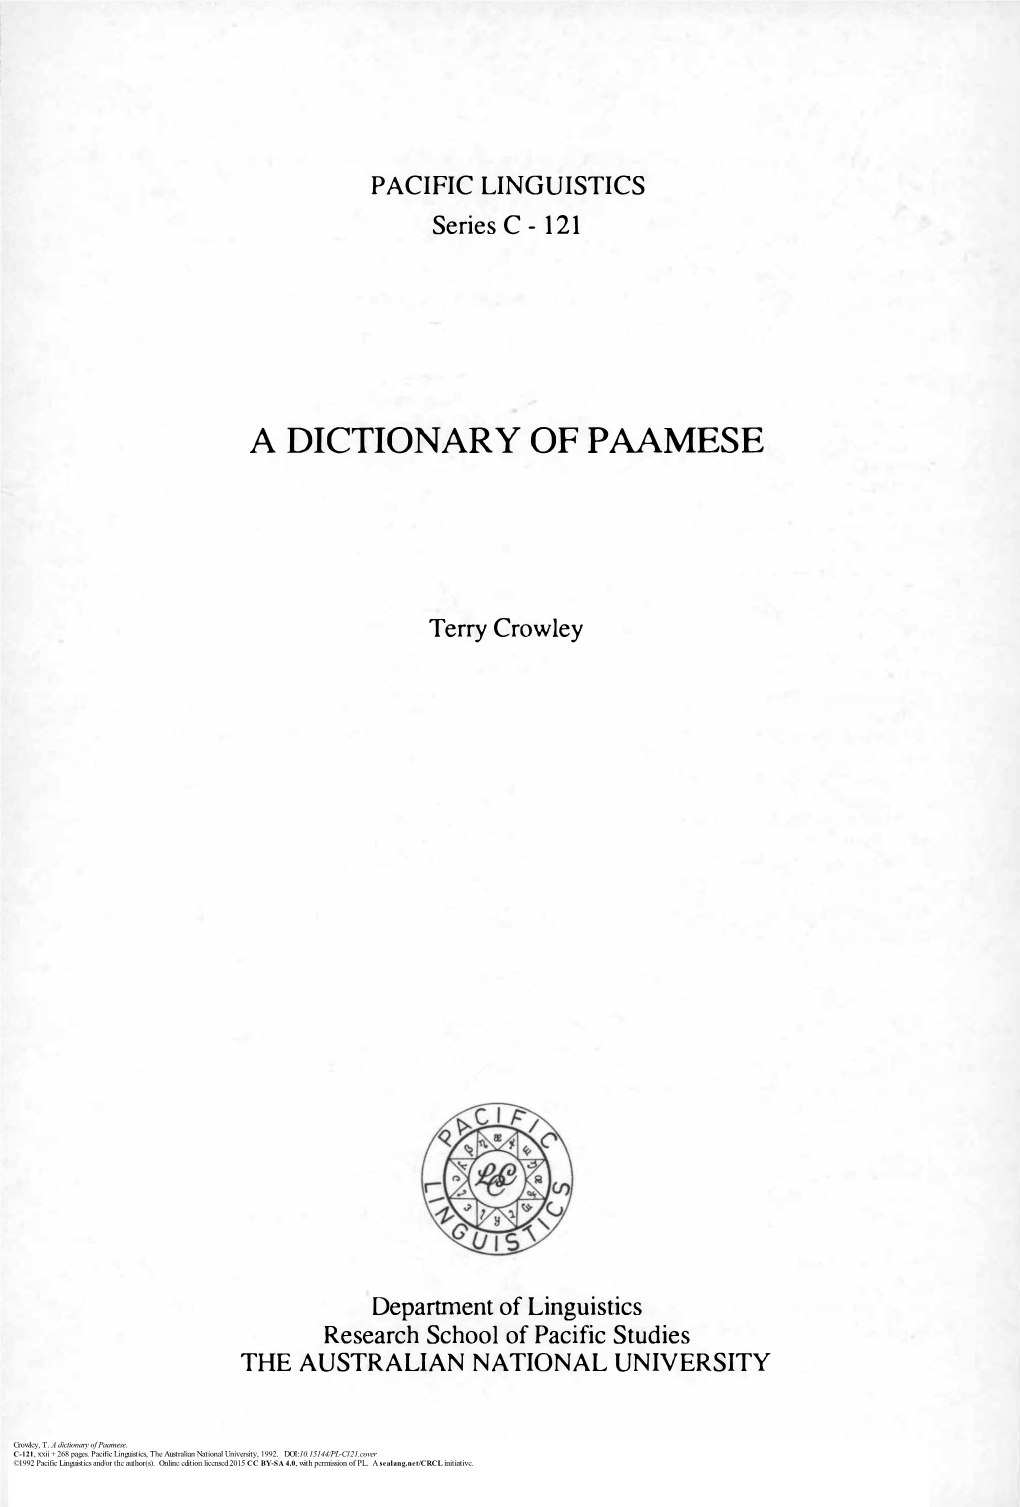 A Dictionary of Paamese